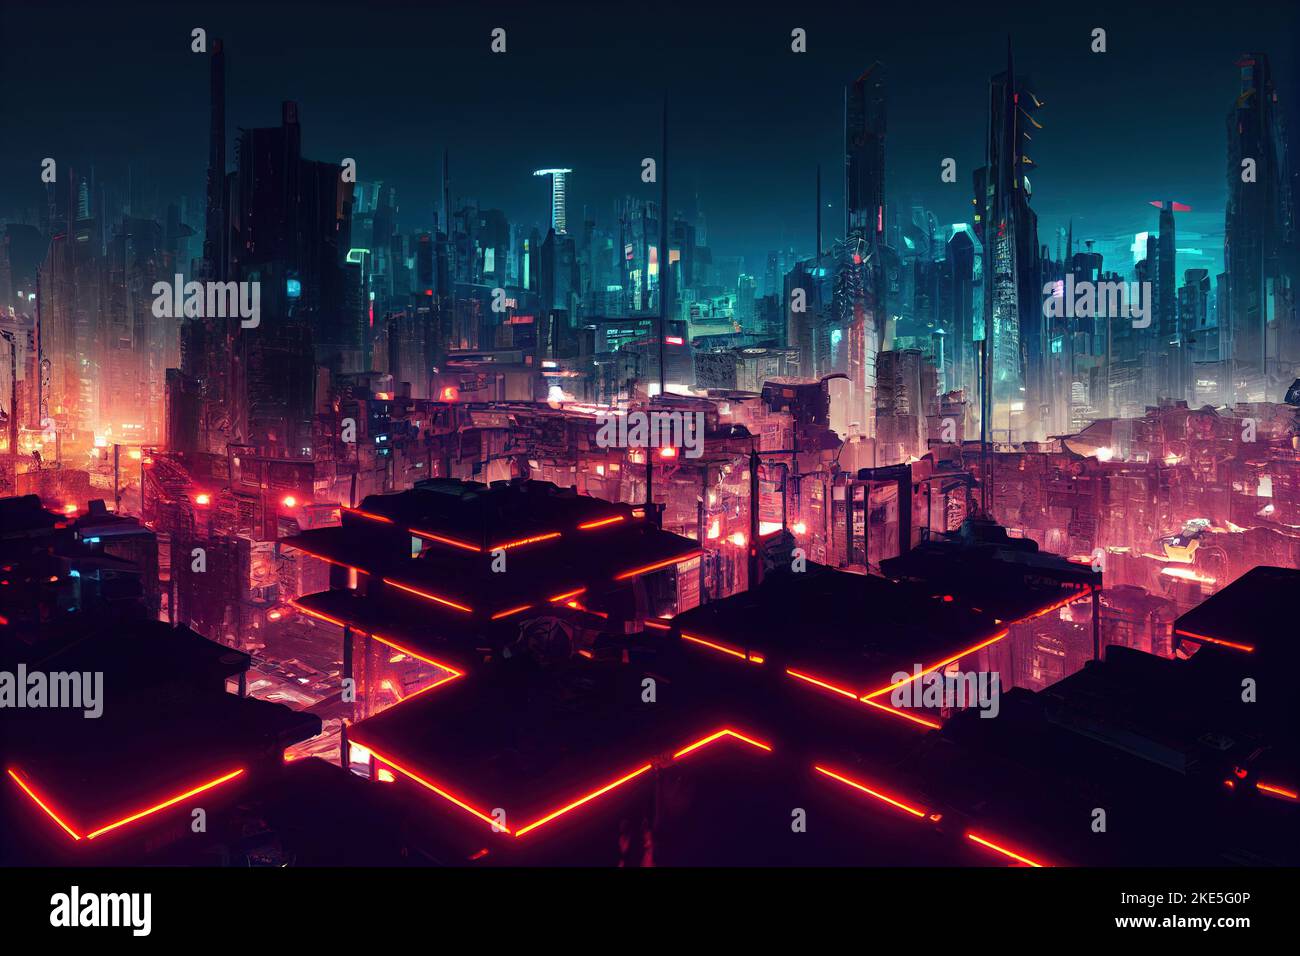 Cyberpunk Futuristic City panorama .Future Fiction with neon signs and lights. Cyberpunk city with futuristic buildings. Digital illustrations. Stock Photo